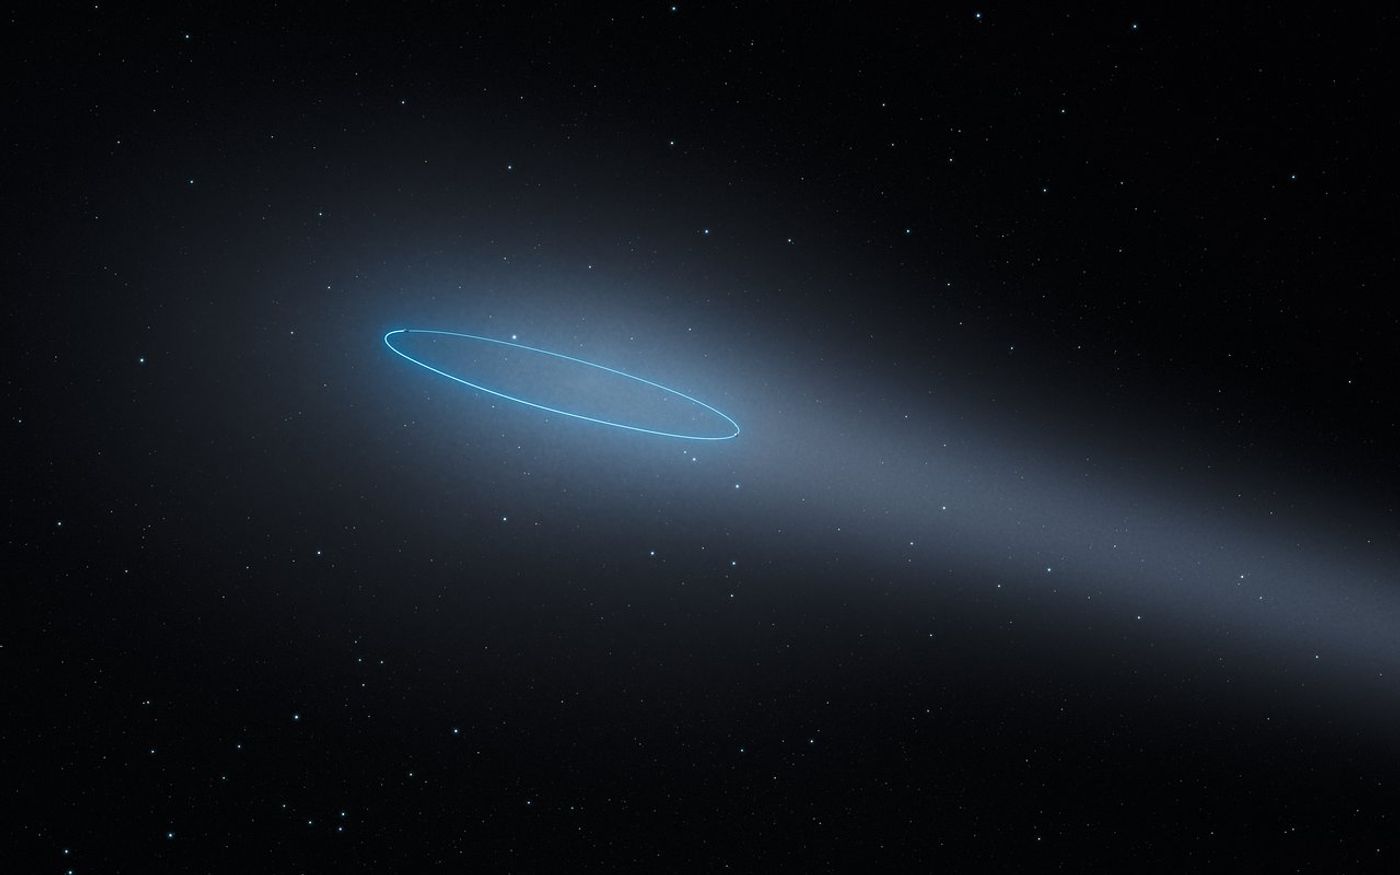 An artist's impression of the 288P binary asteroid system.